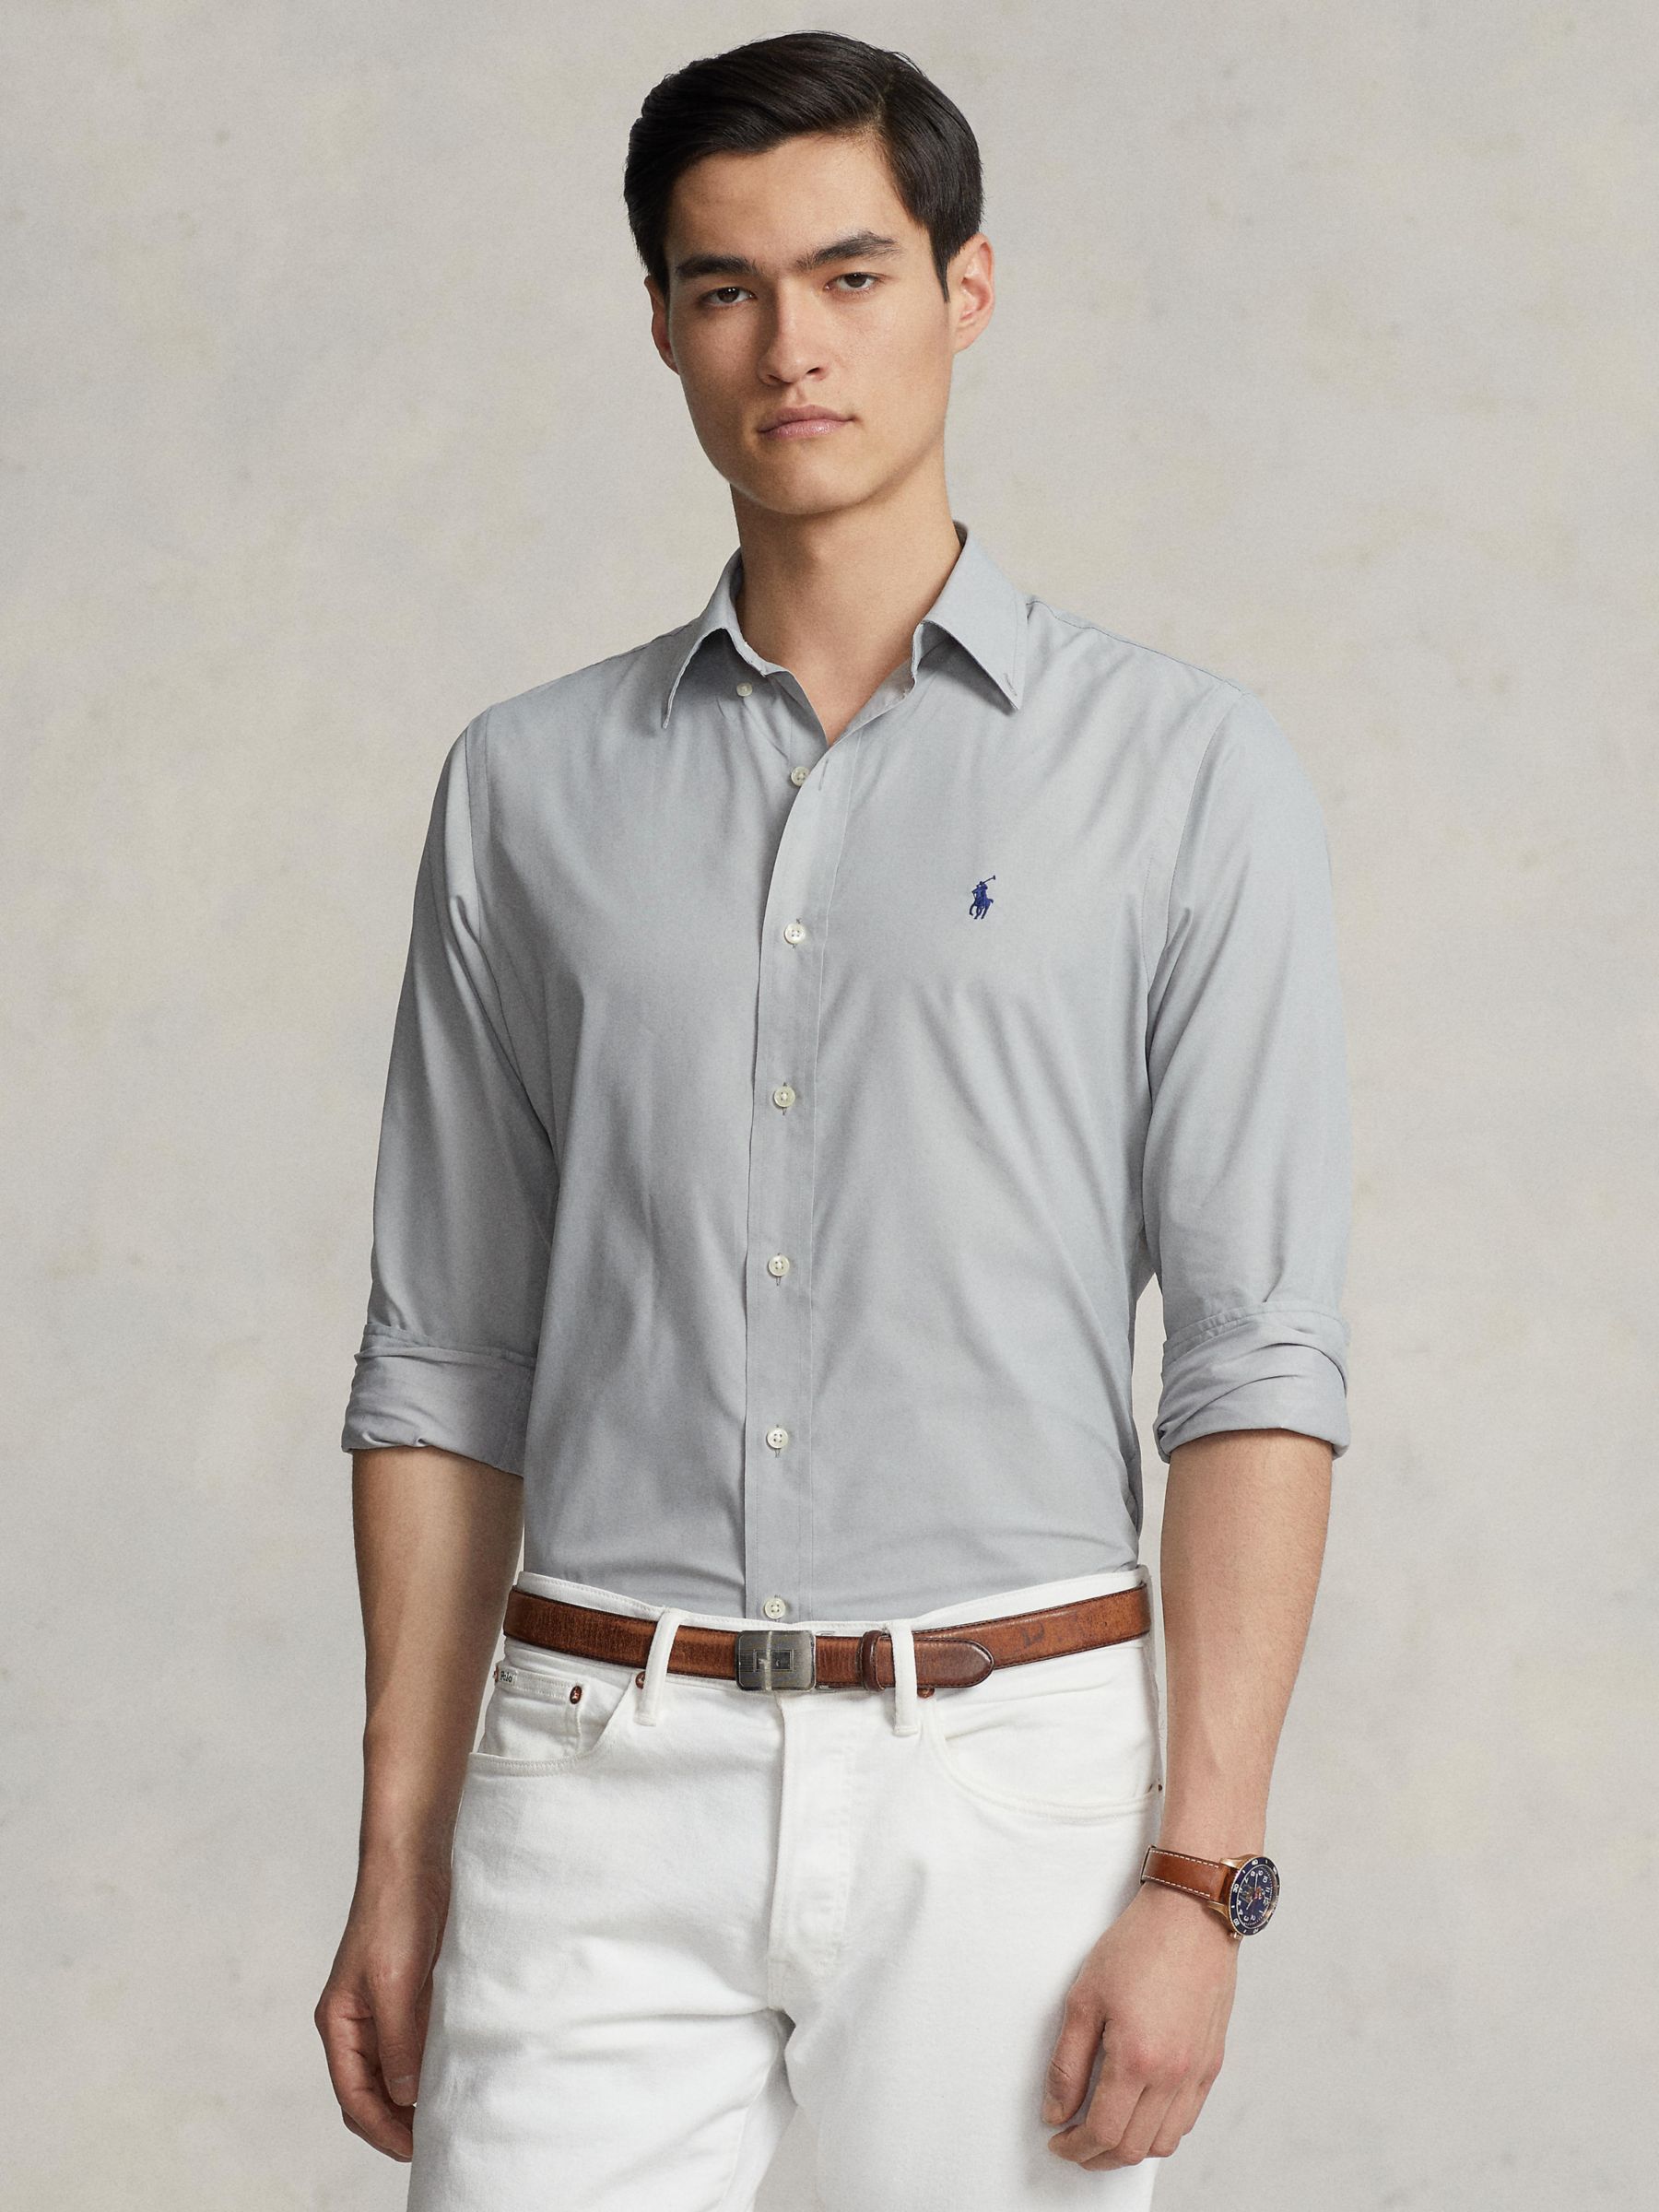 Buy Polo Ralph Lauren Long Sleeve Classic Fit Performance Twill Shirt Online at johnlewis.com